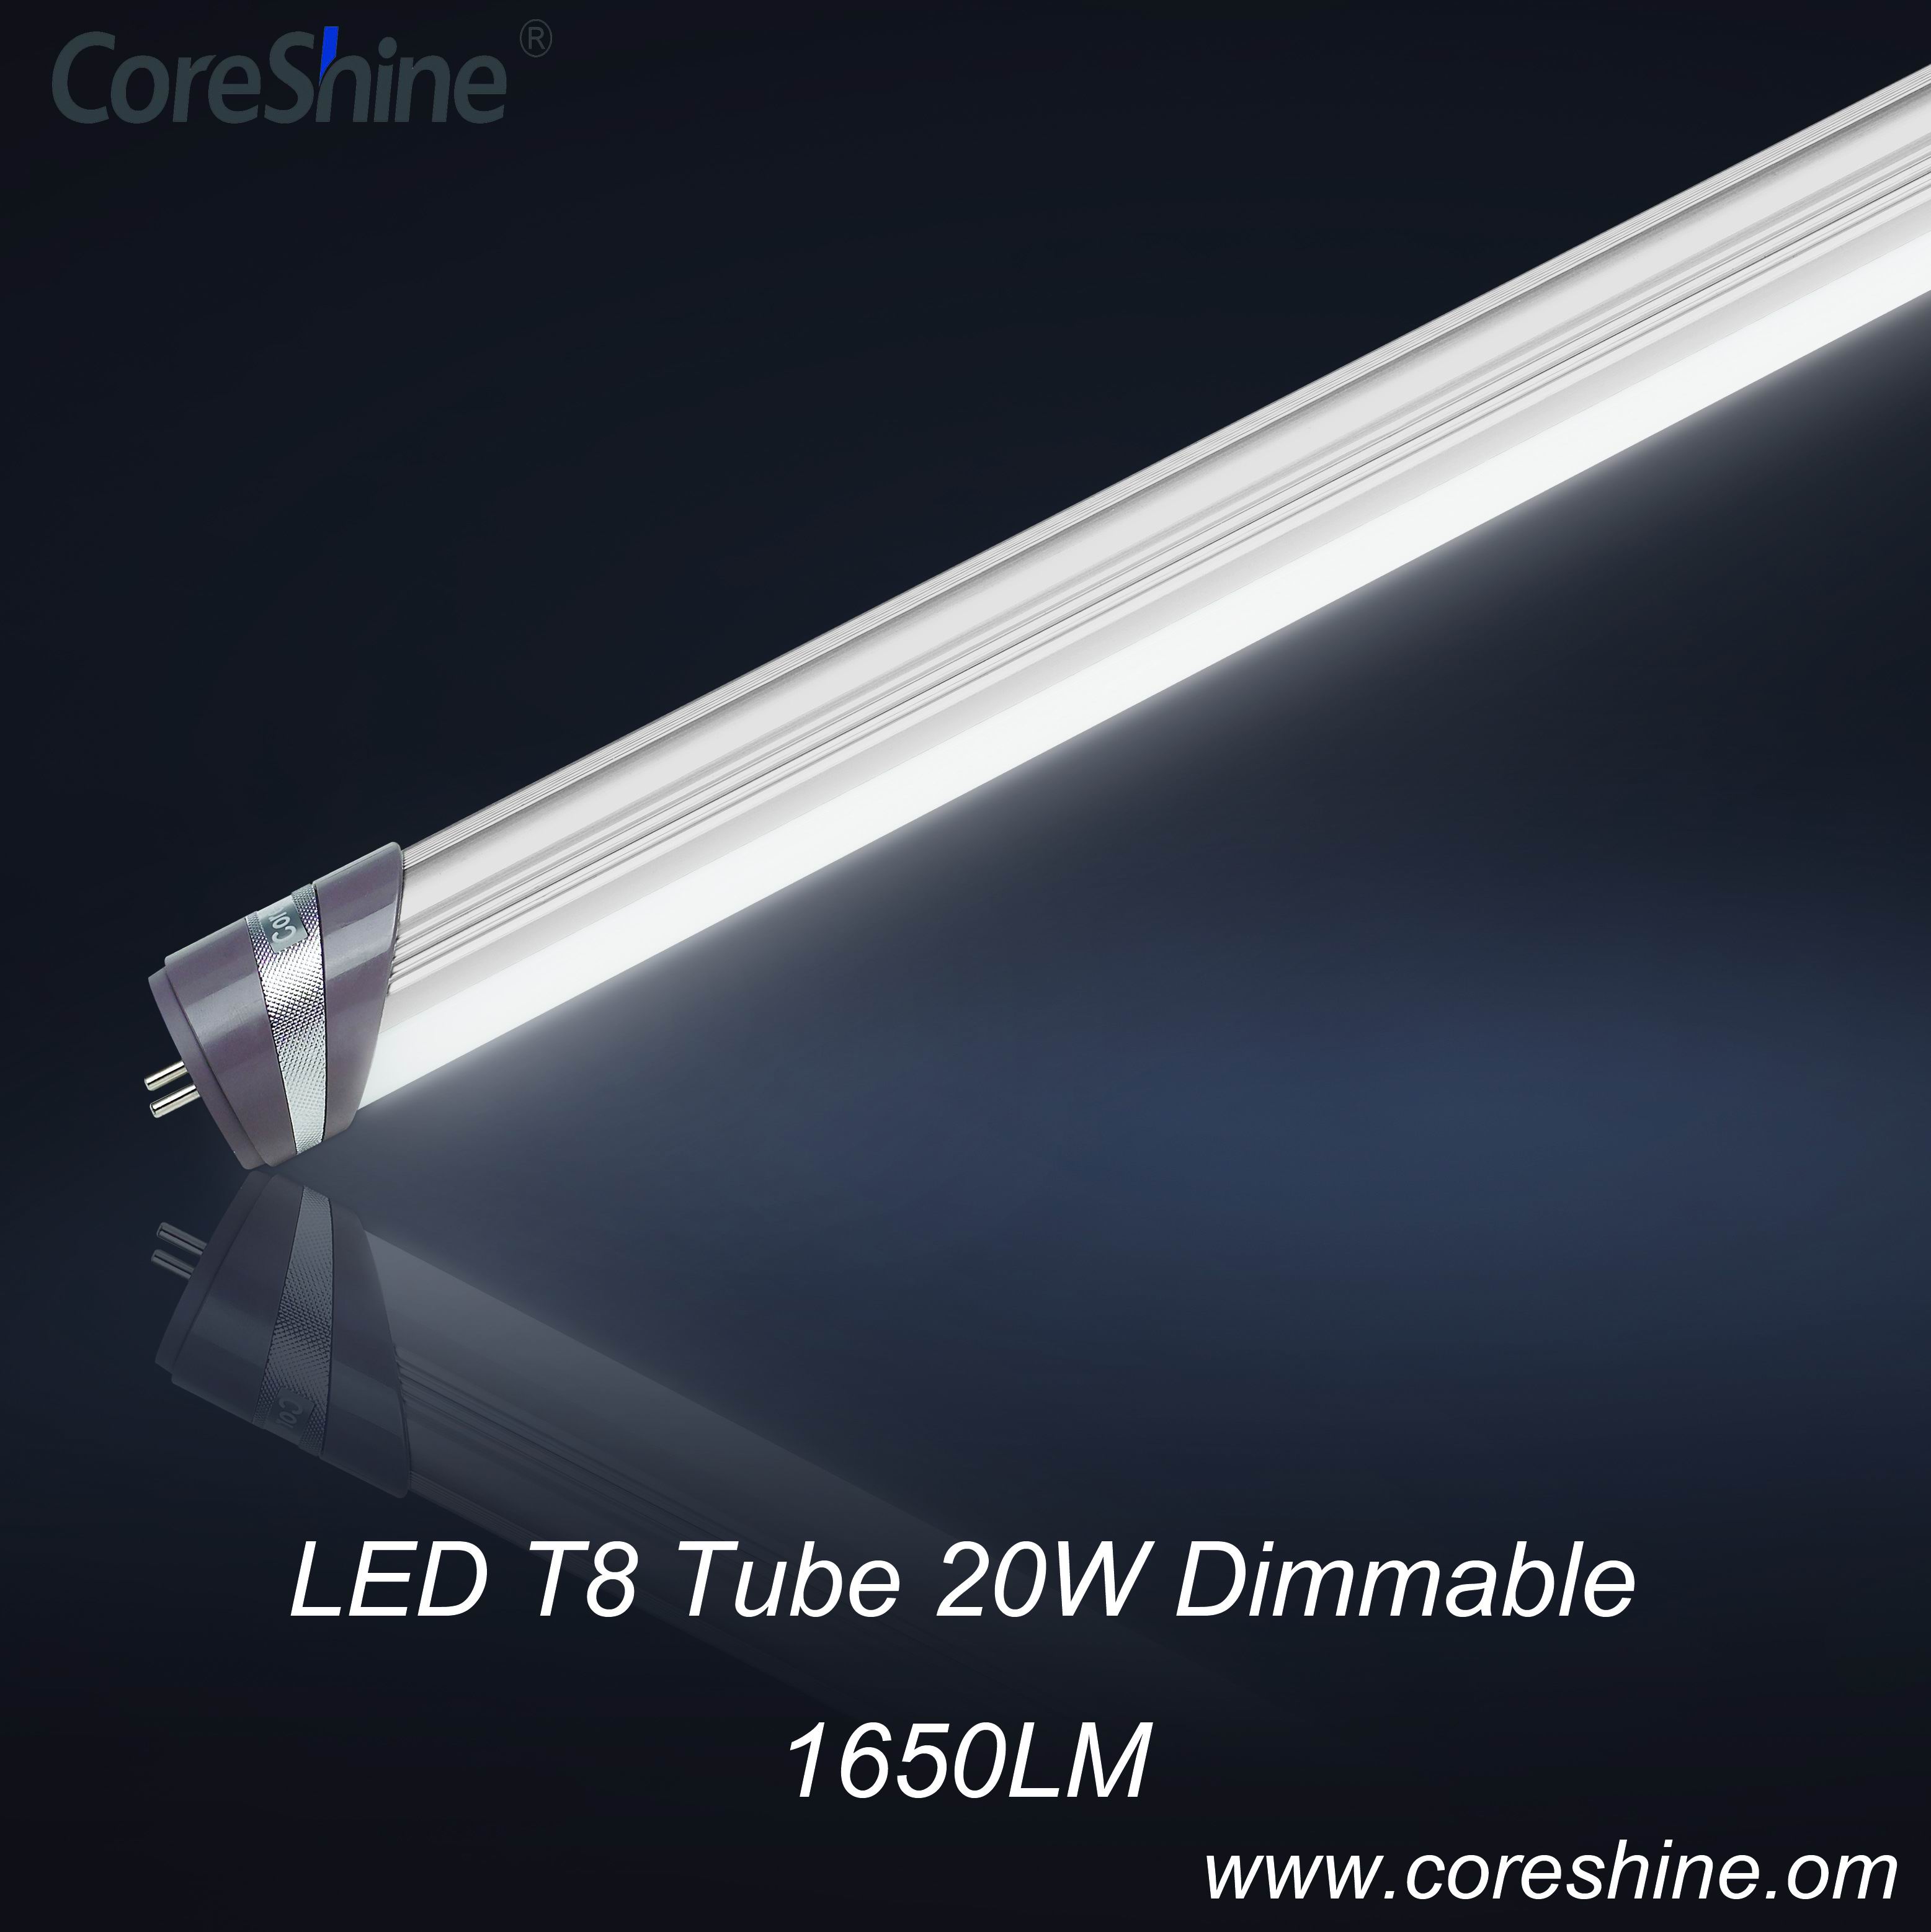 T8 LED Tube-20W with CE,RoHs and PSE certification